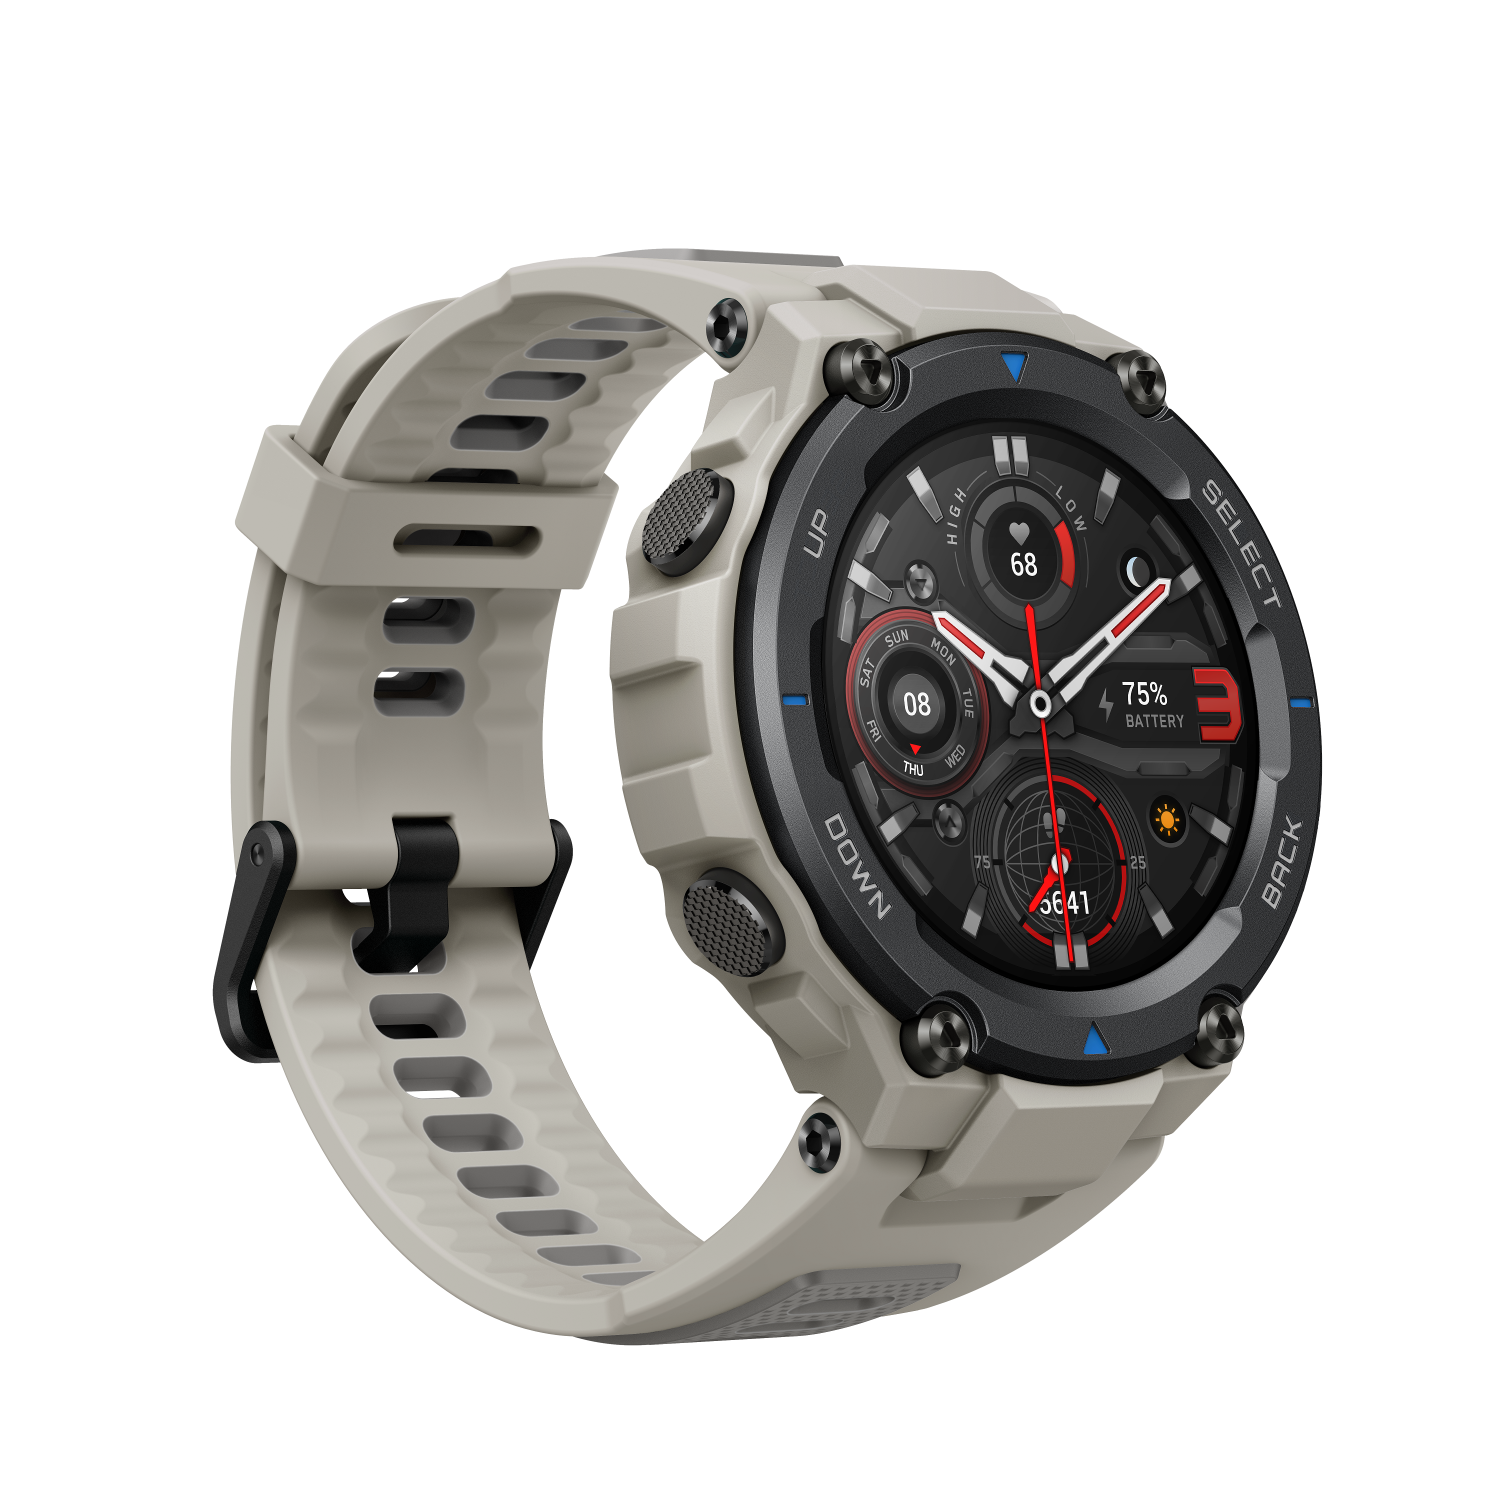 Amazfit T-Rex Pro Smartwatch Fitness Watch with Built-in GPS, Military Standard Certified, 18 Day Battery Life, SpO2, Heart Rate Monitor, 100+ Sports Modes, 10 ATM Waterproof, Music Control, GREY